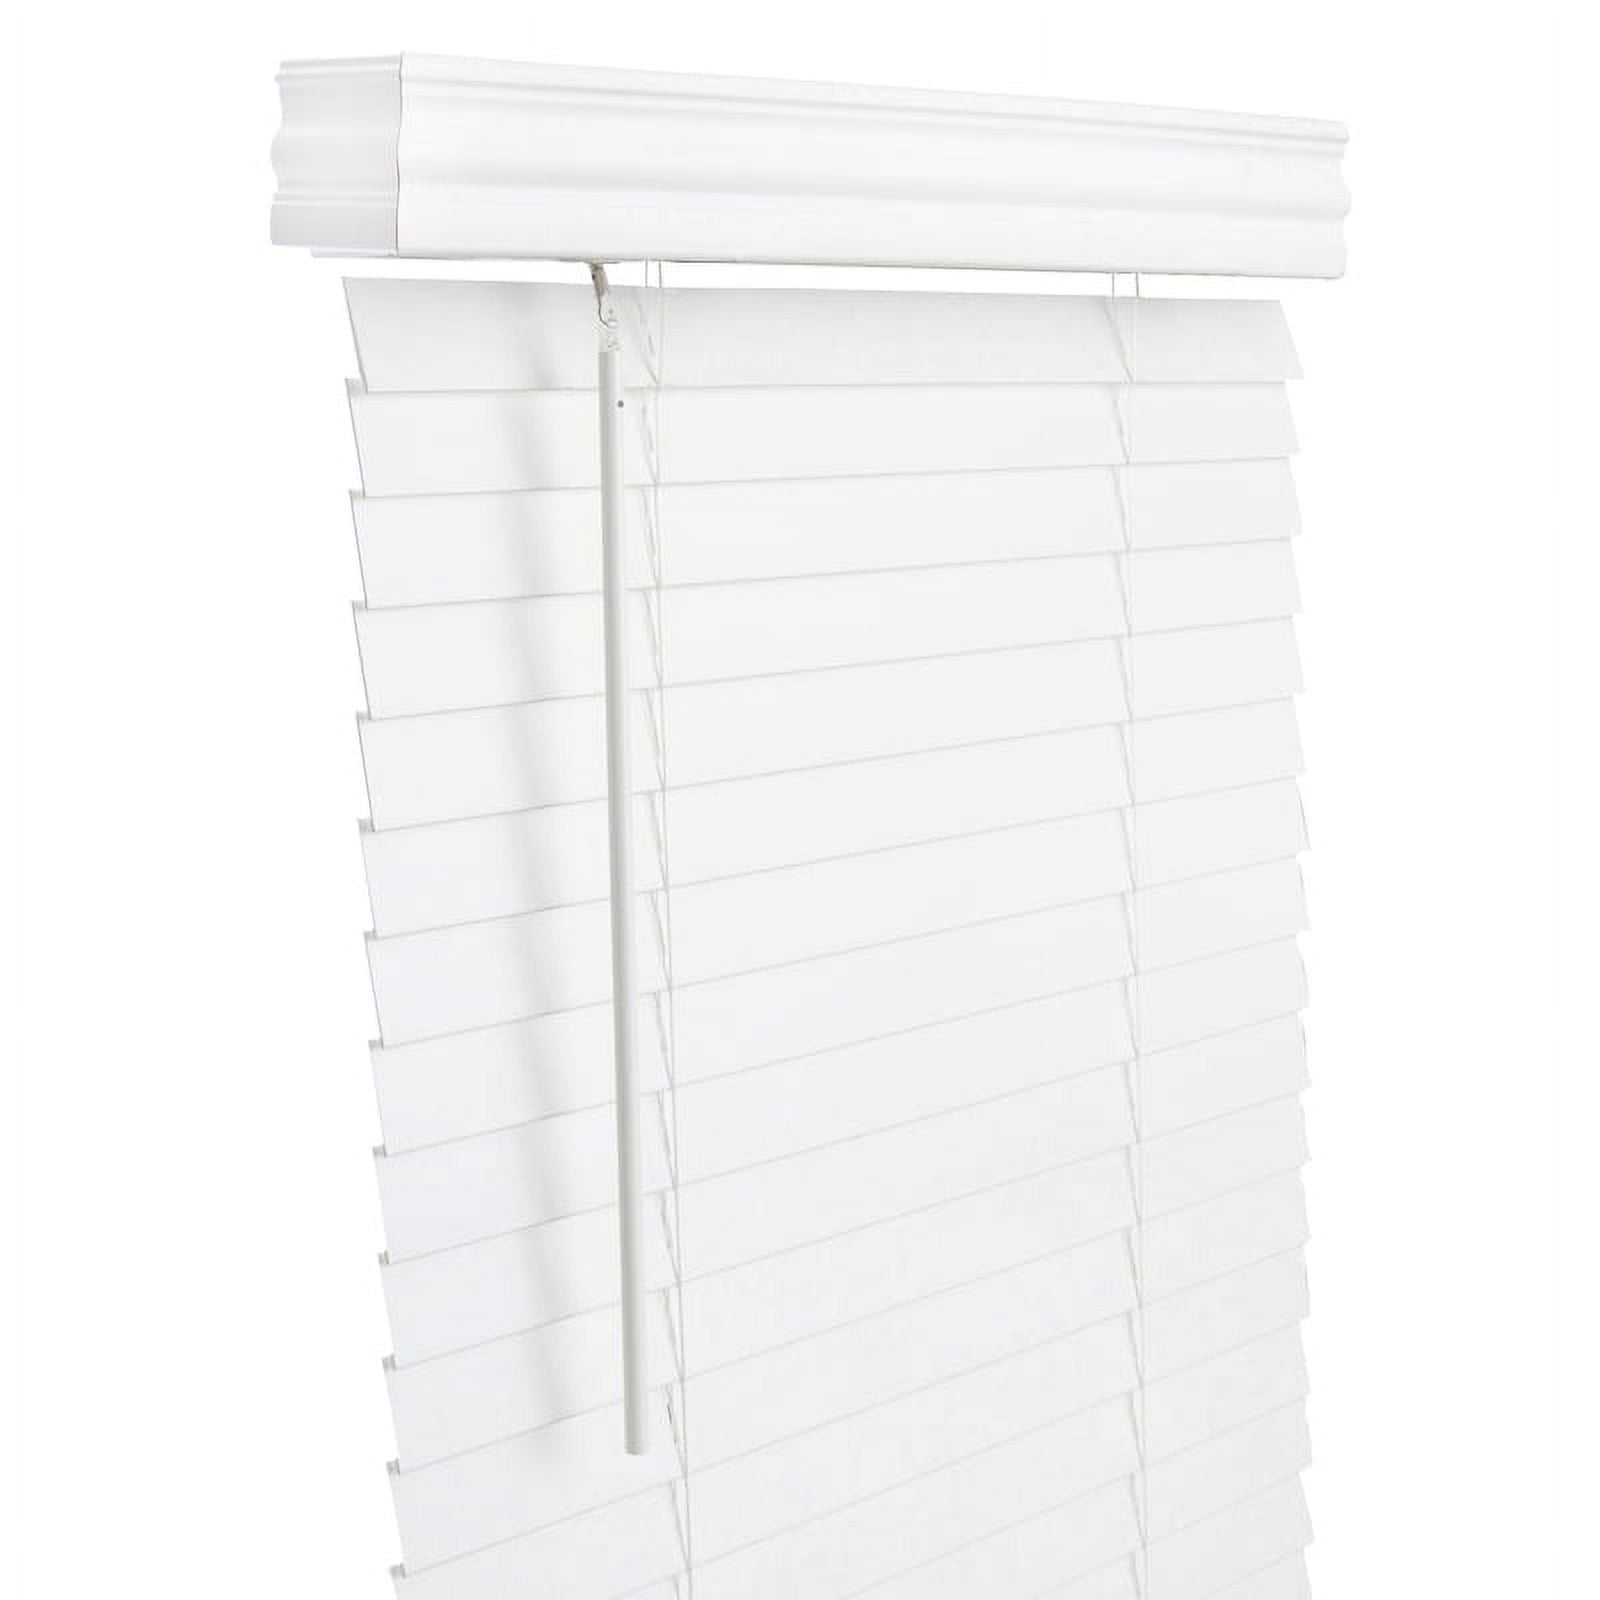 5005775 Synthetic Wood Blinds, White